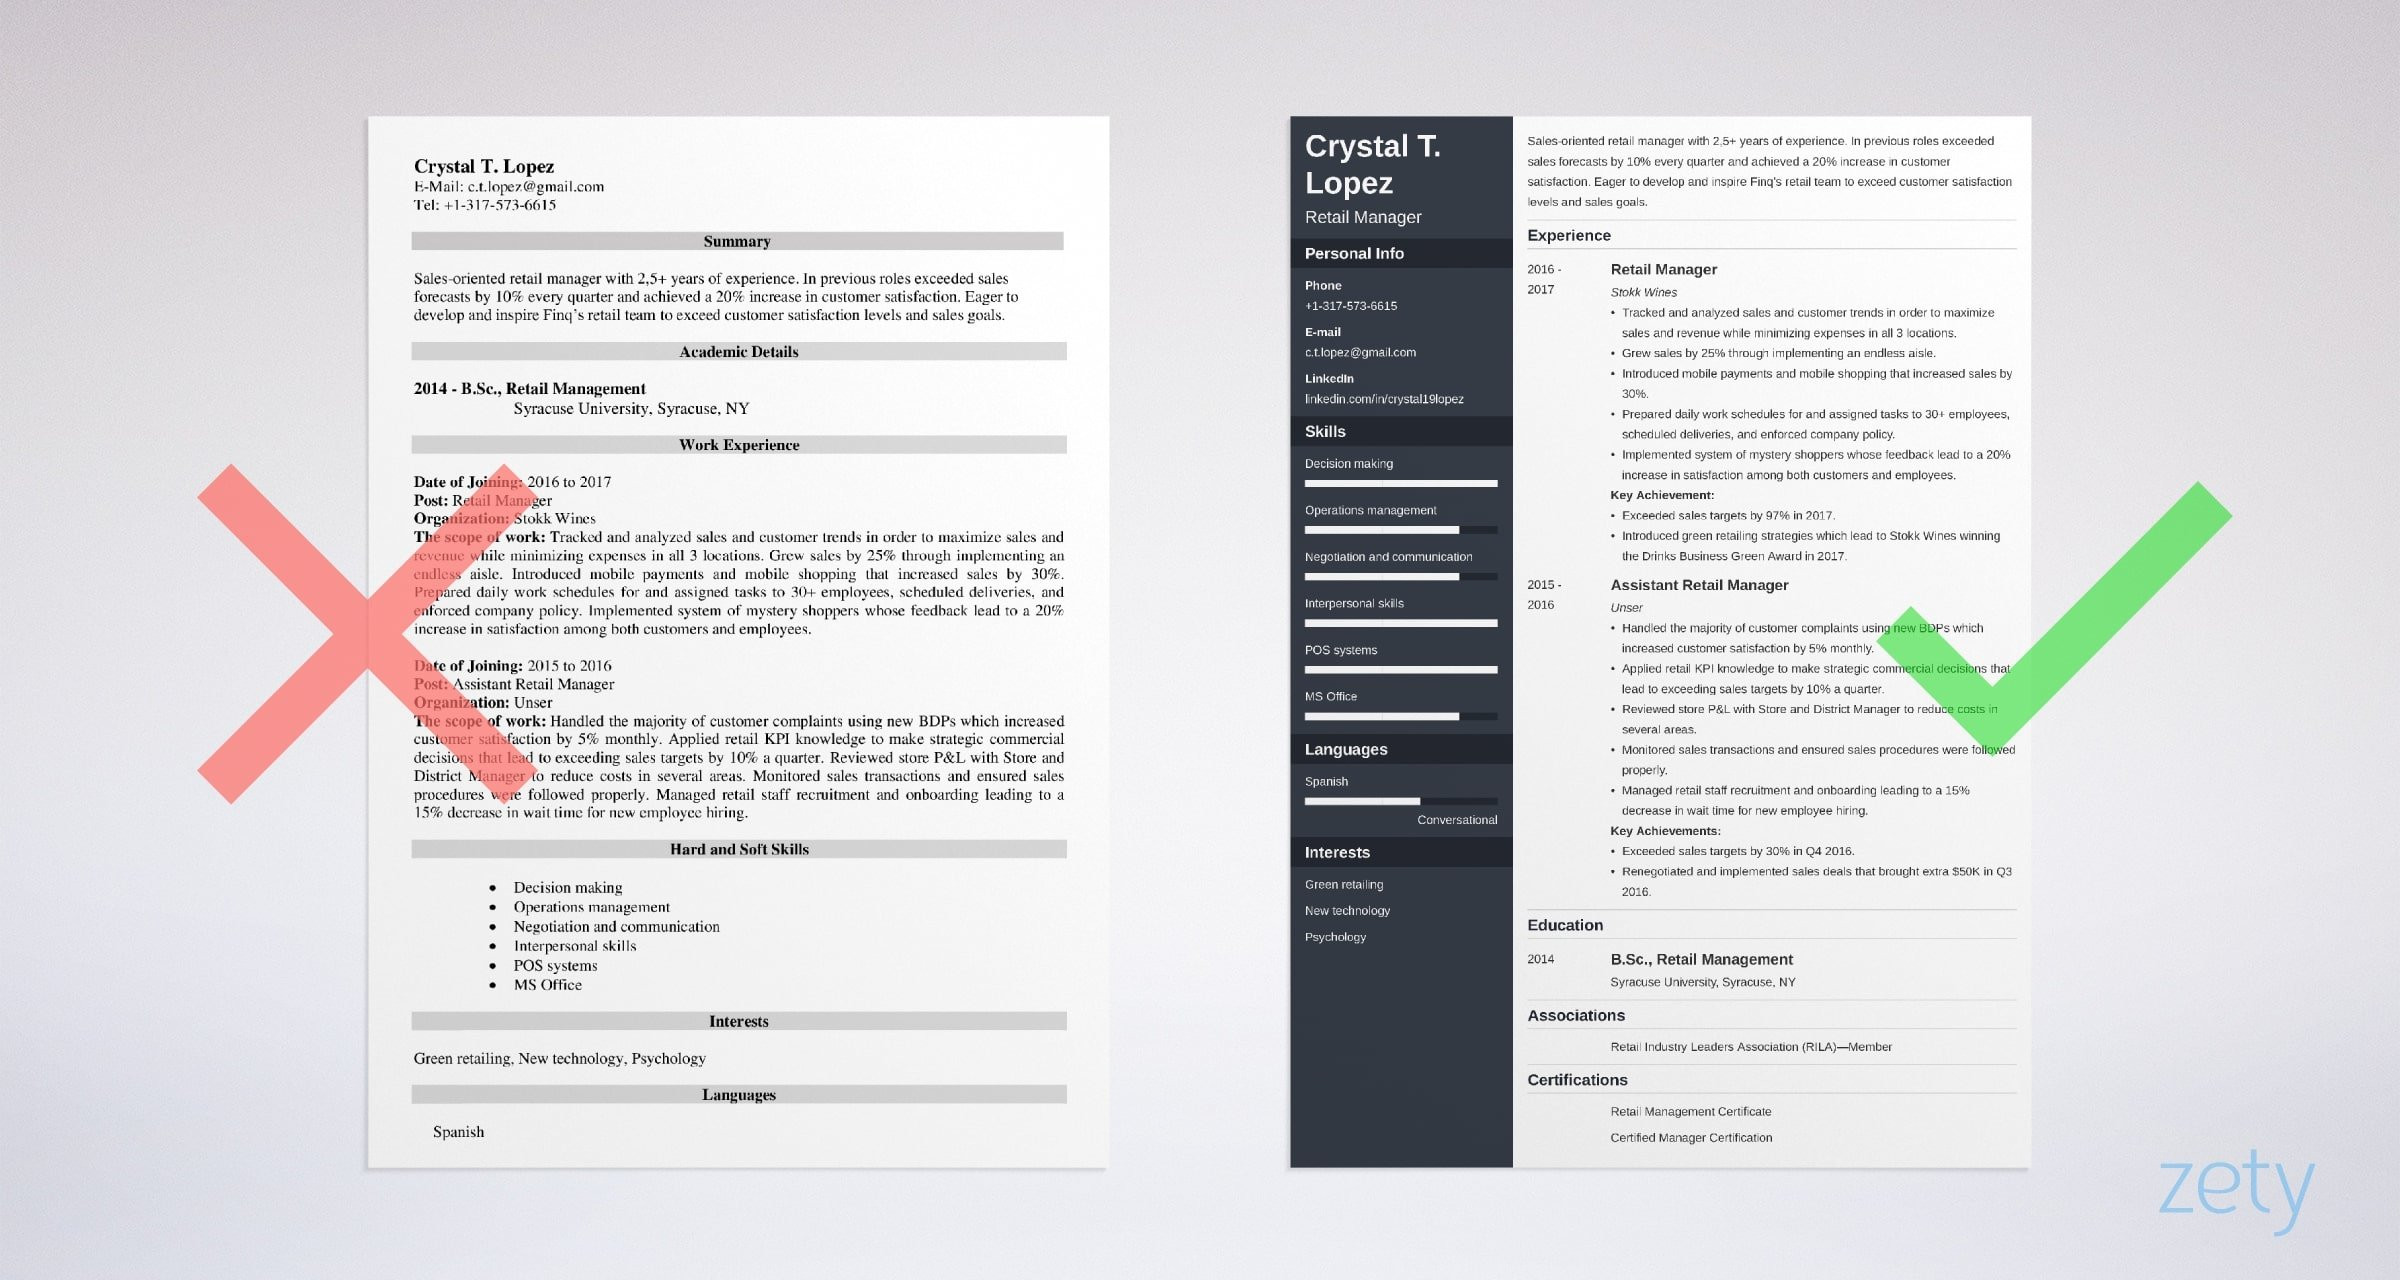 Resume Samples Retail to Admin Jobs Retail Manager Resume Examples (with Skills & Objectives)